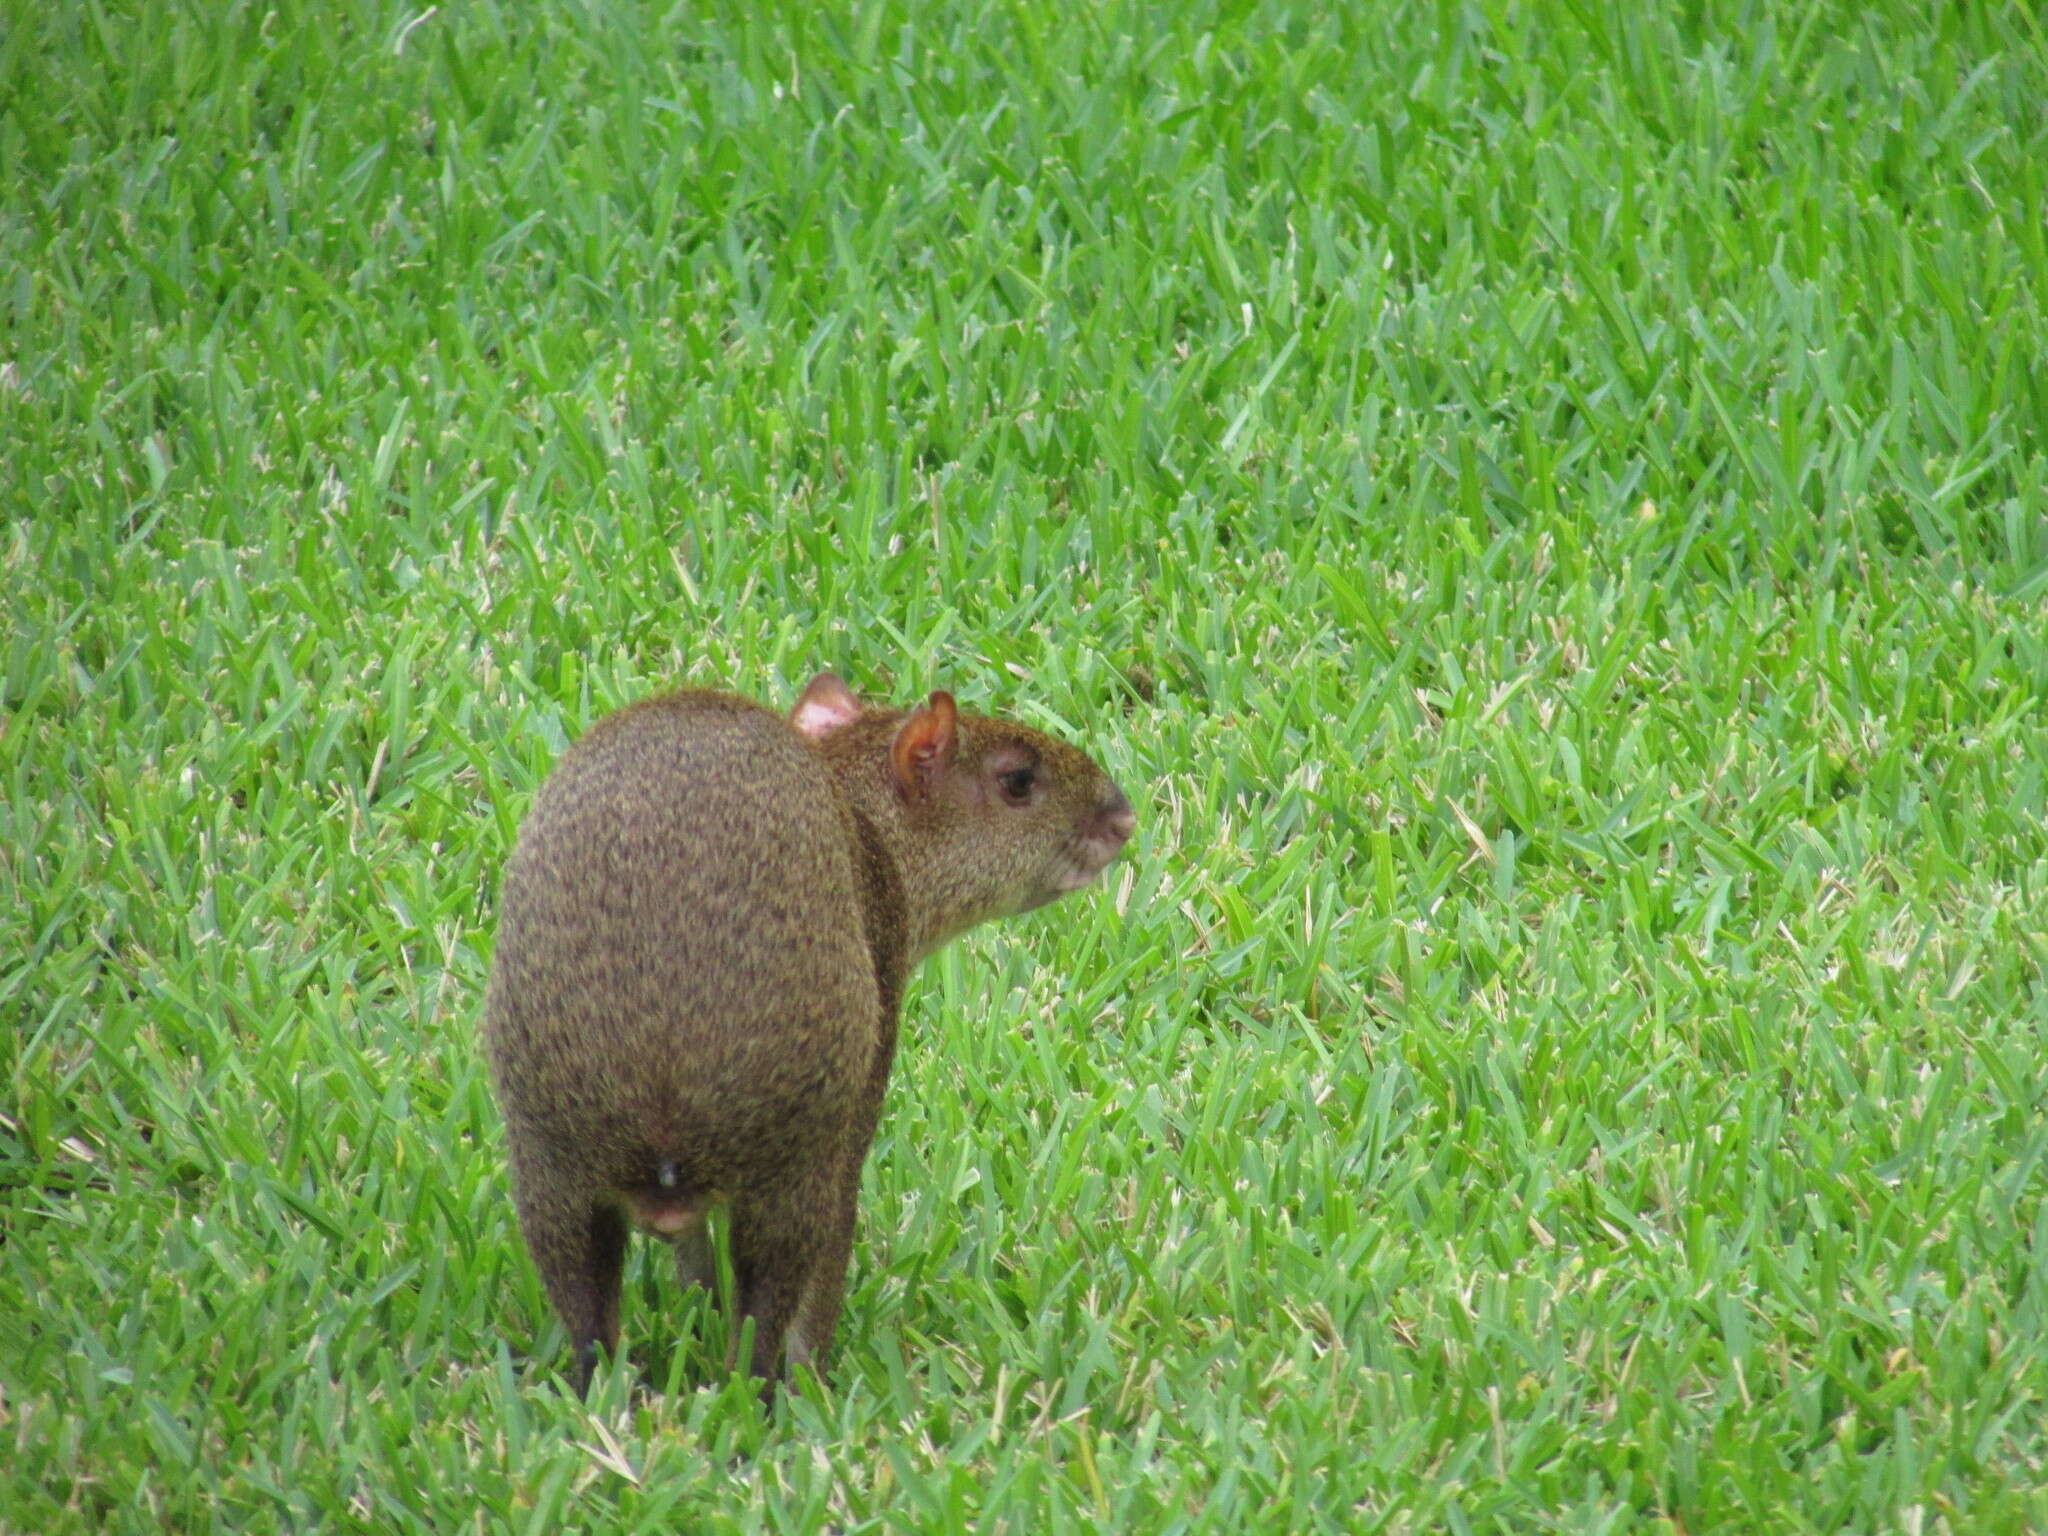 Image of Central American Agouti